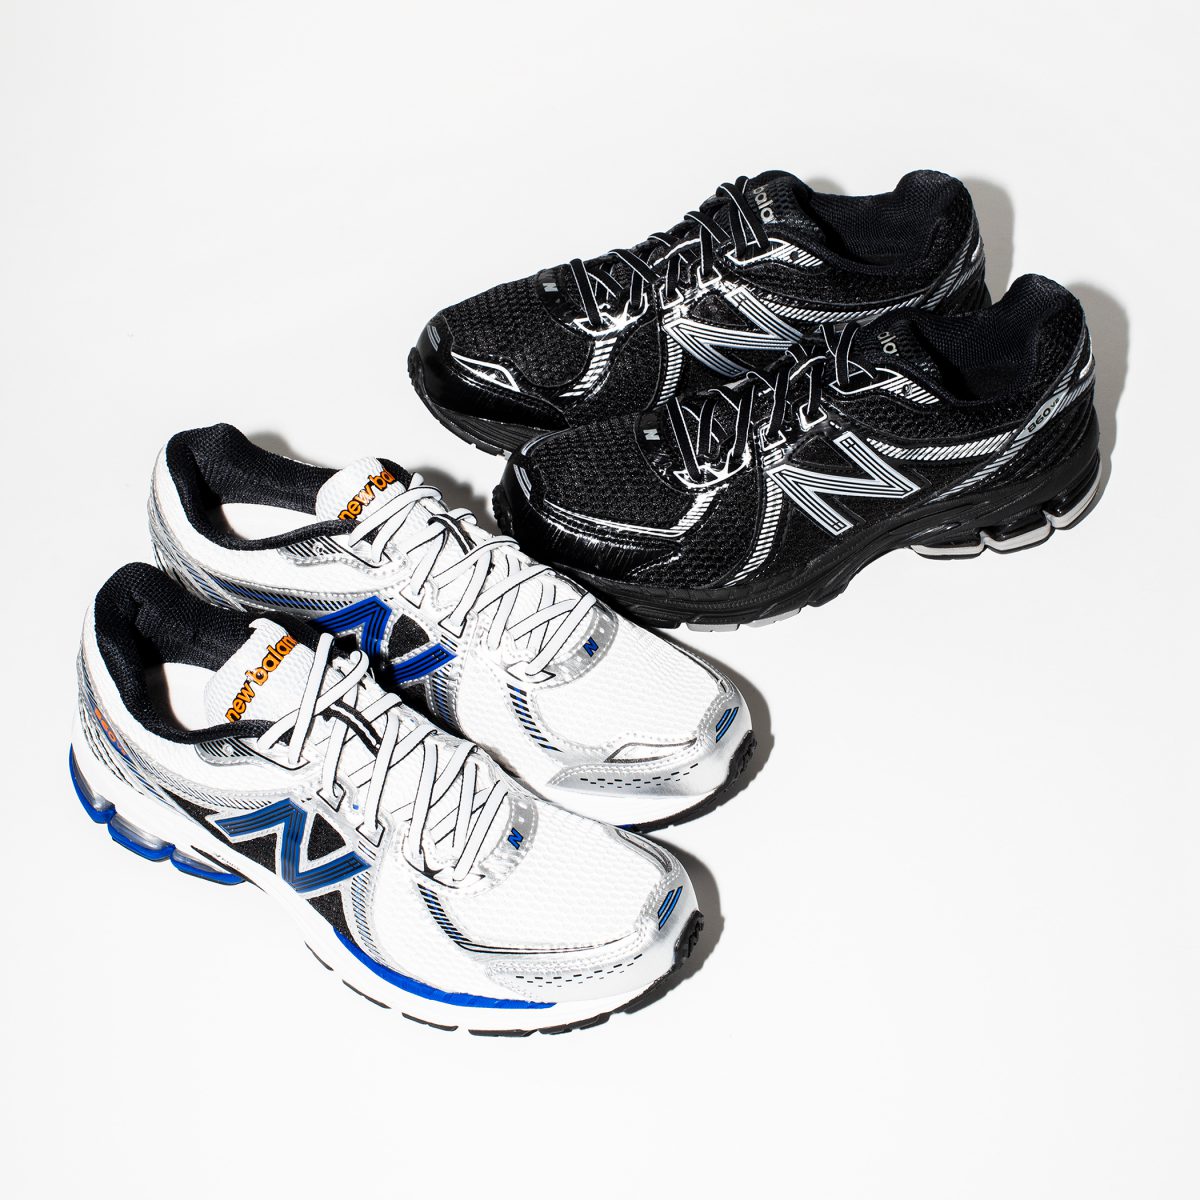 new balance x HOUYHNHNM - All about NB / NEWS / トレンドと共鳴する ...